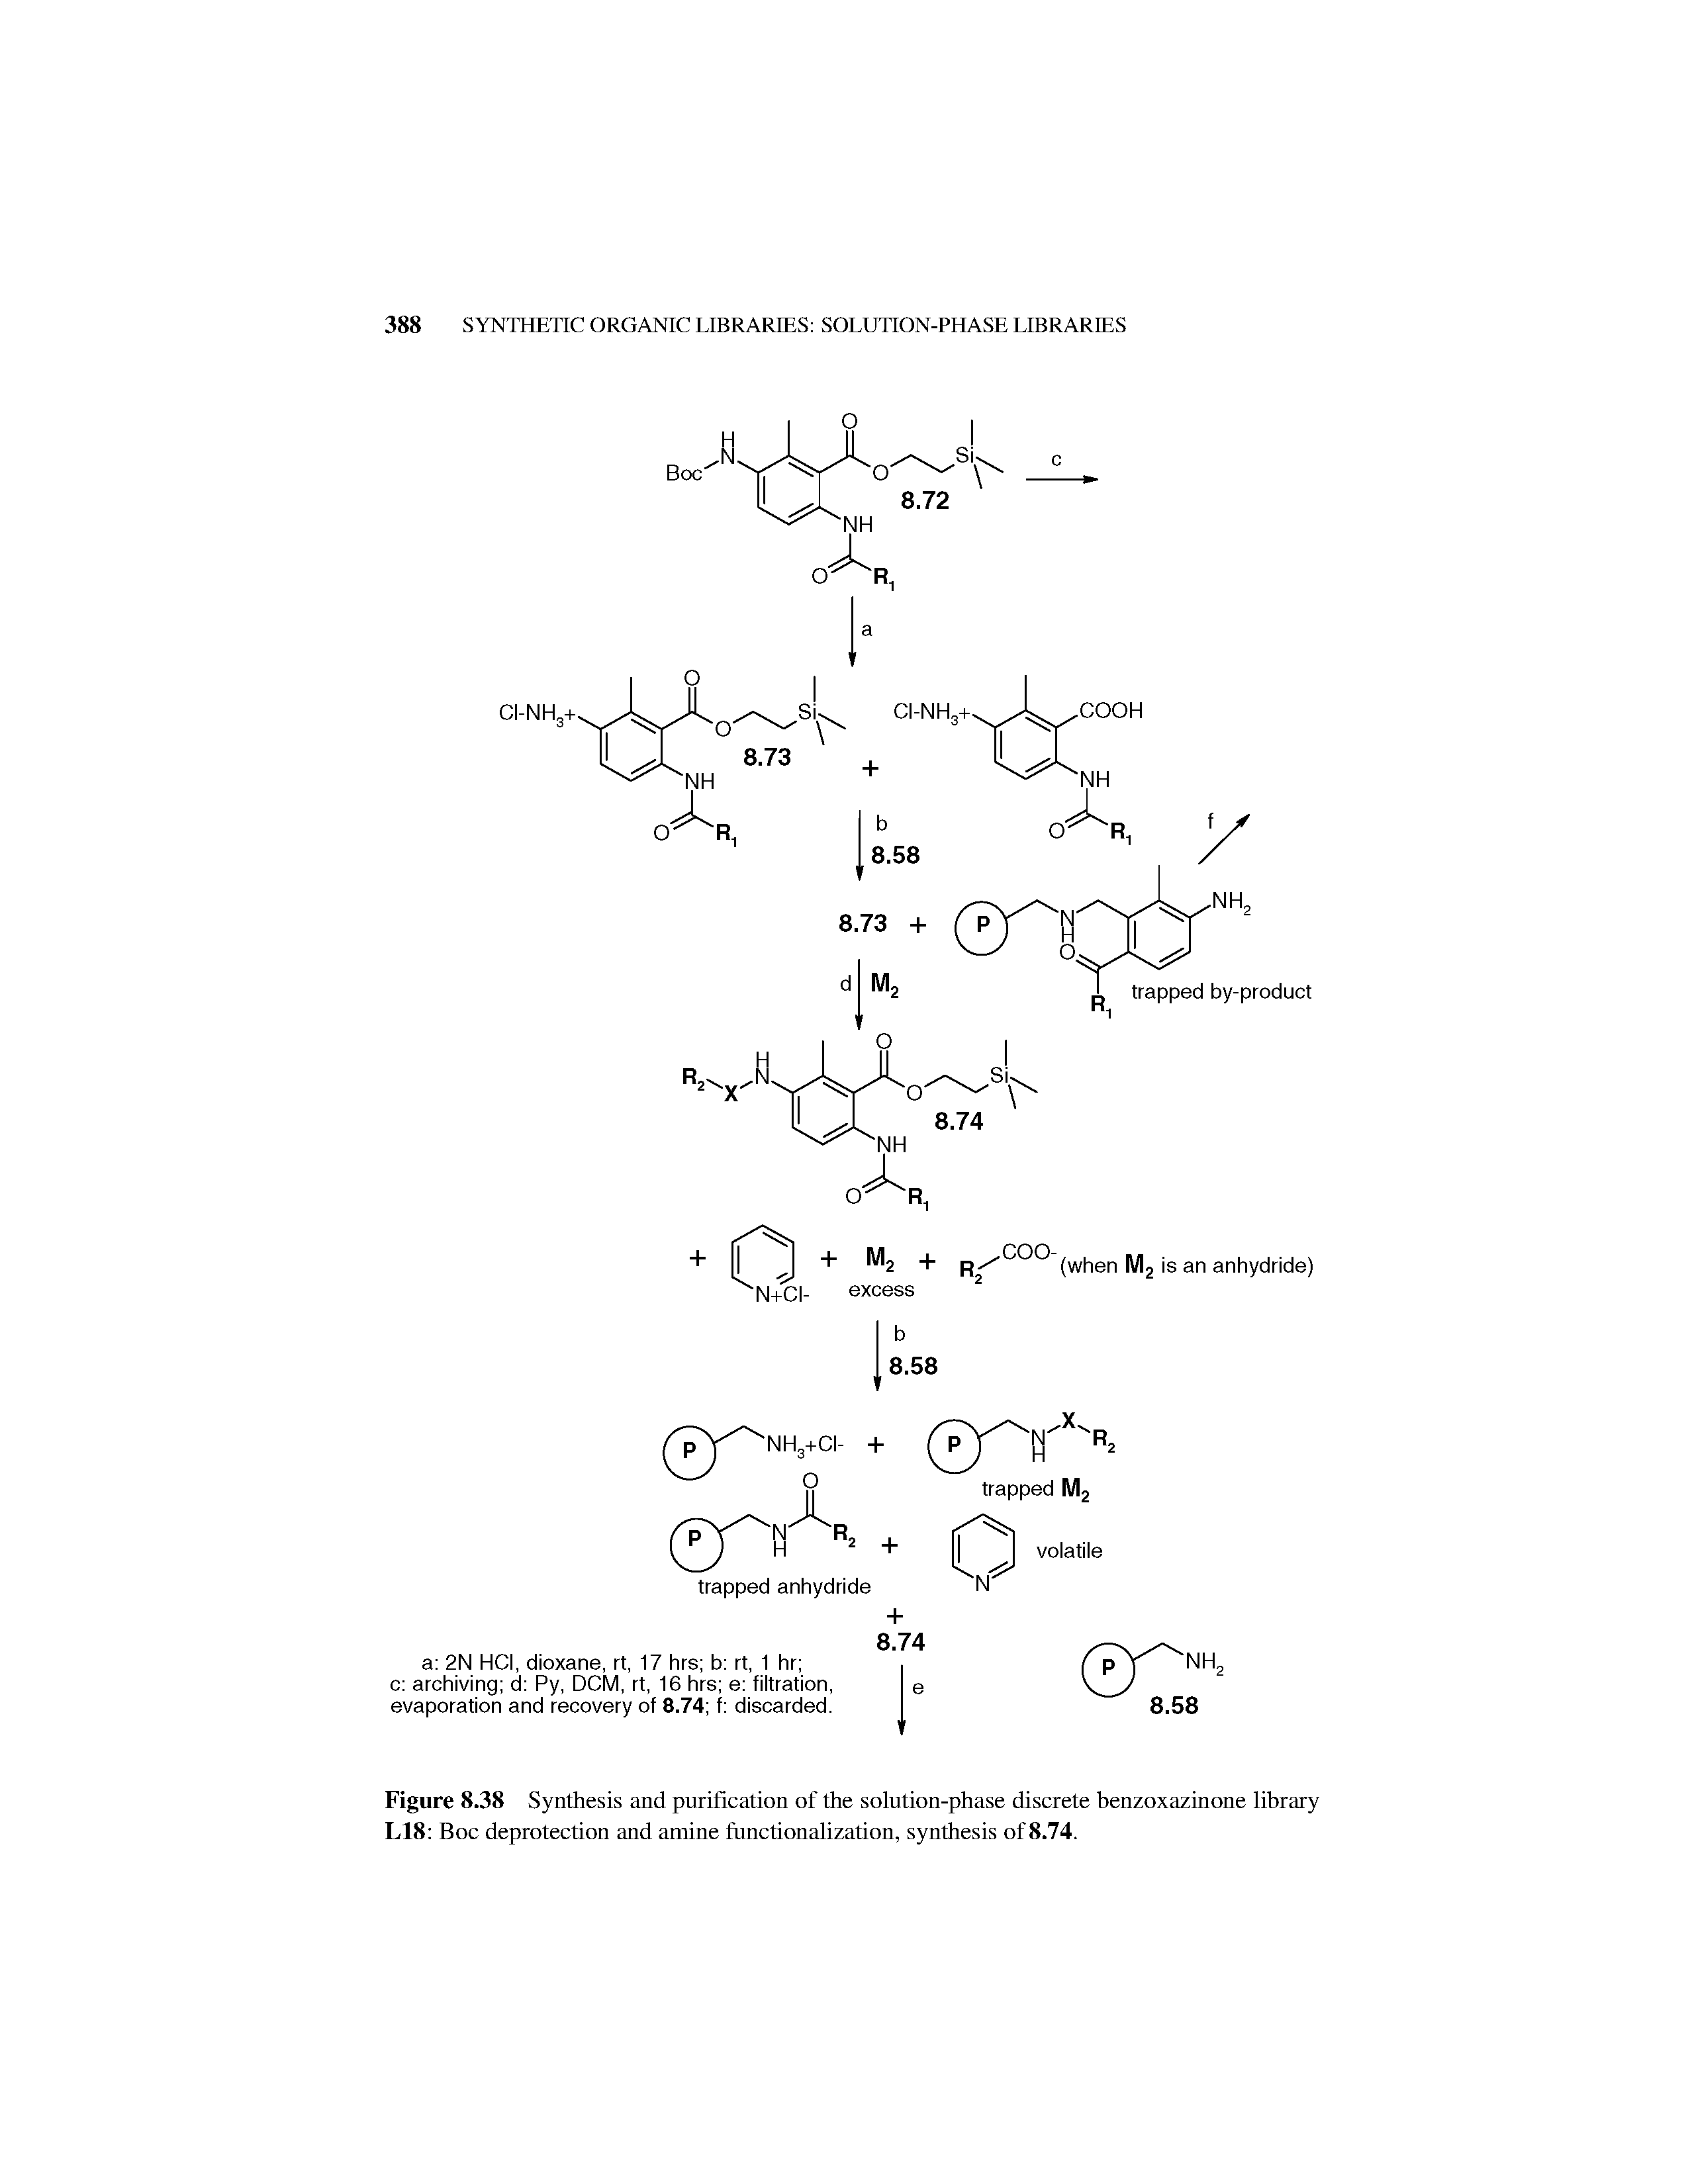 Figure 8.38 Synthesis and purification of the solution-phase discrete benzoxazinone library L18 Boc deprotection and amine functionalization, synthesis of 8.74.